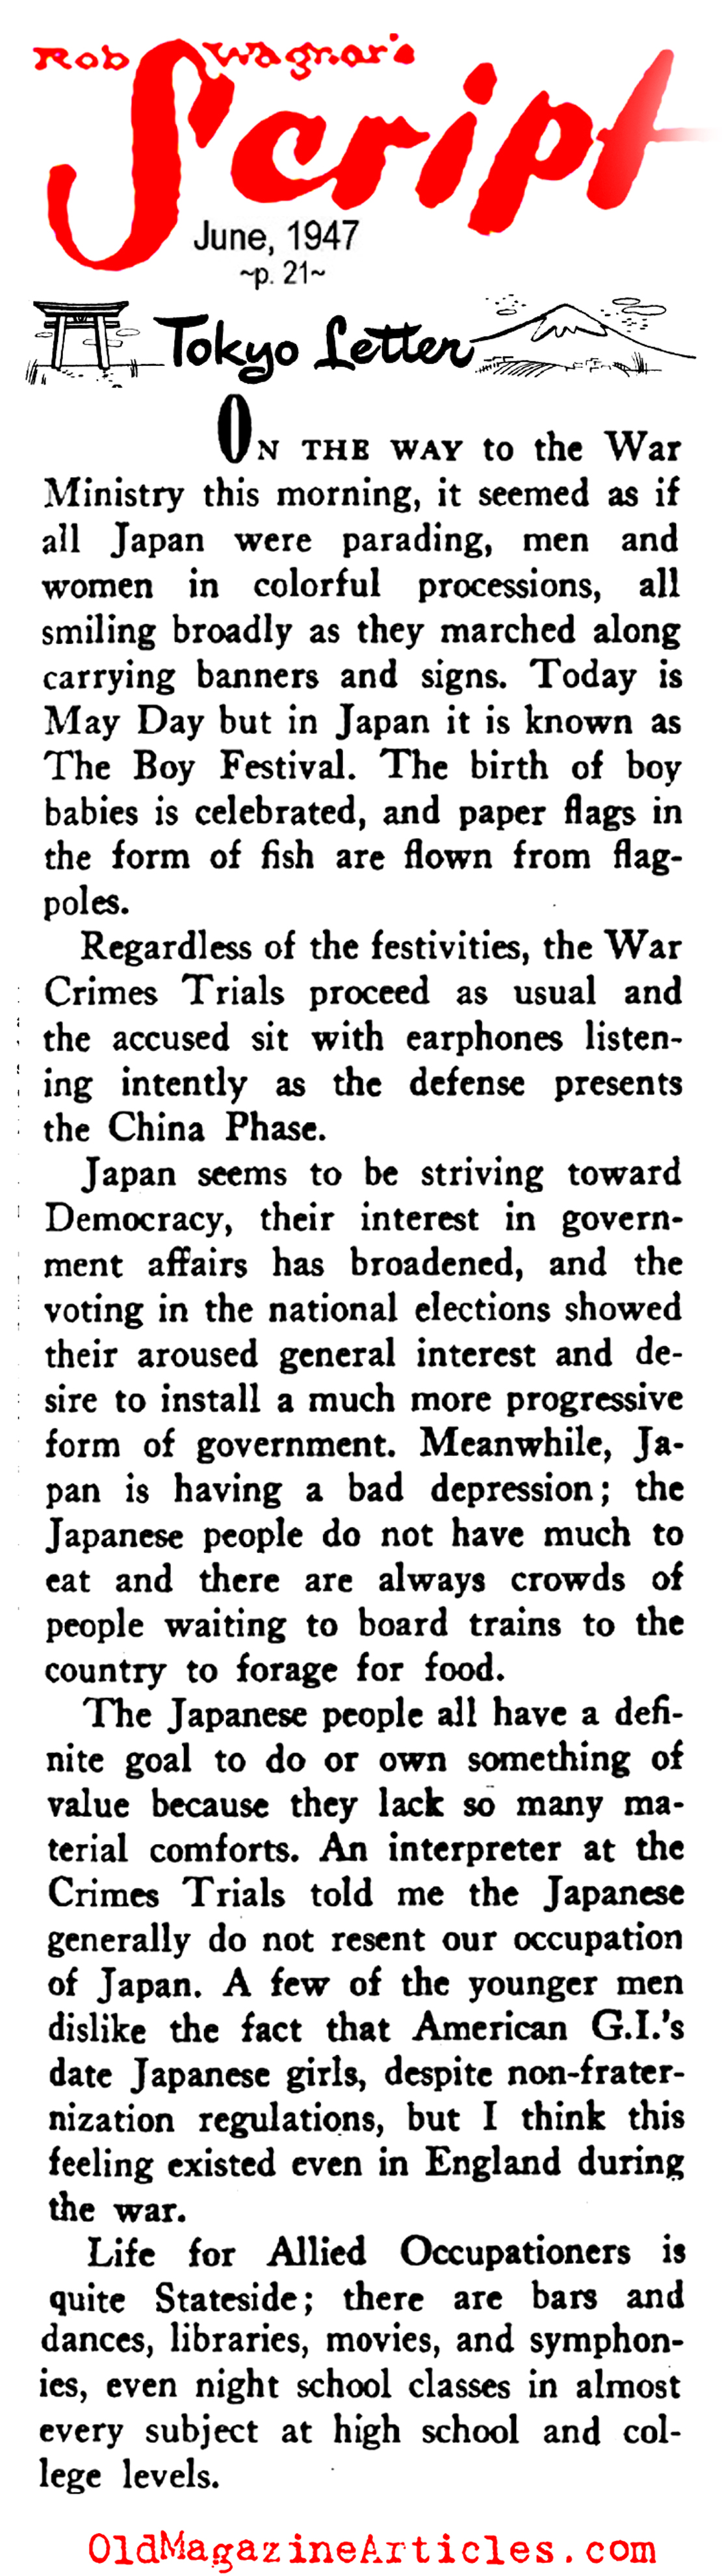 To Live in Occupied Tokyo (Rob Wagner's Script Magazine, 1947)